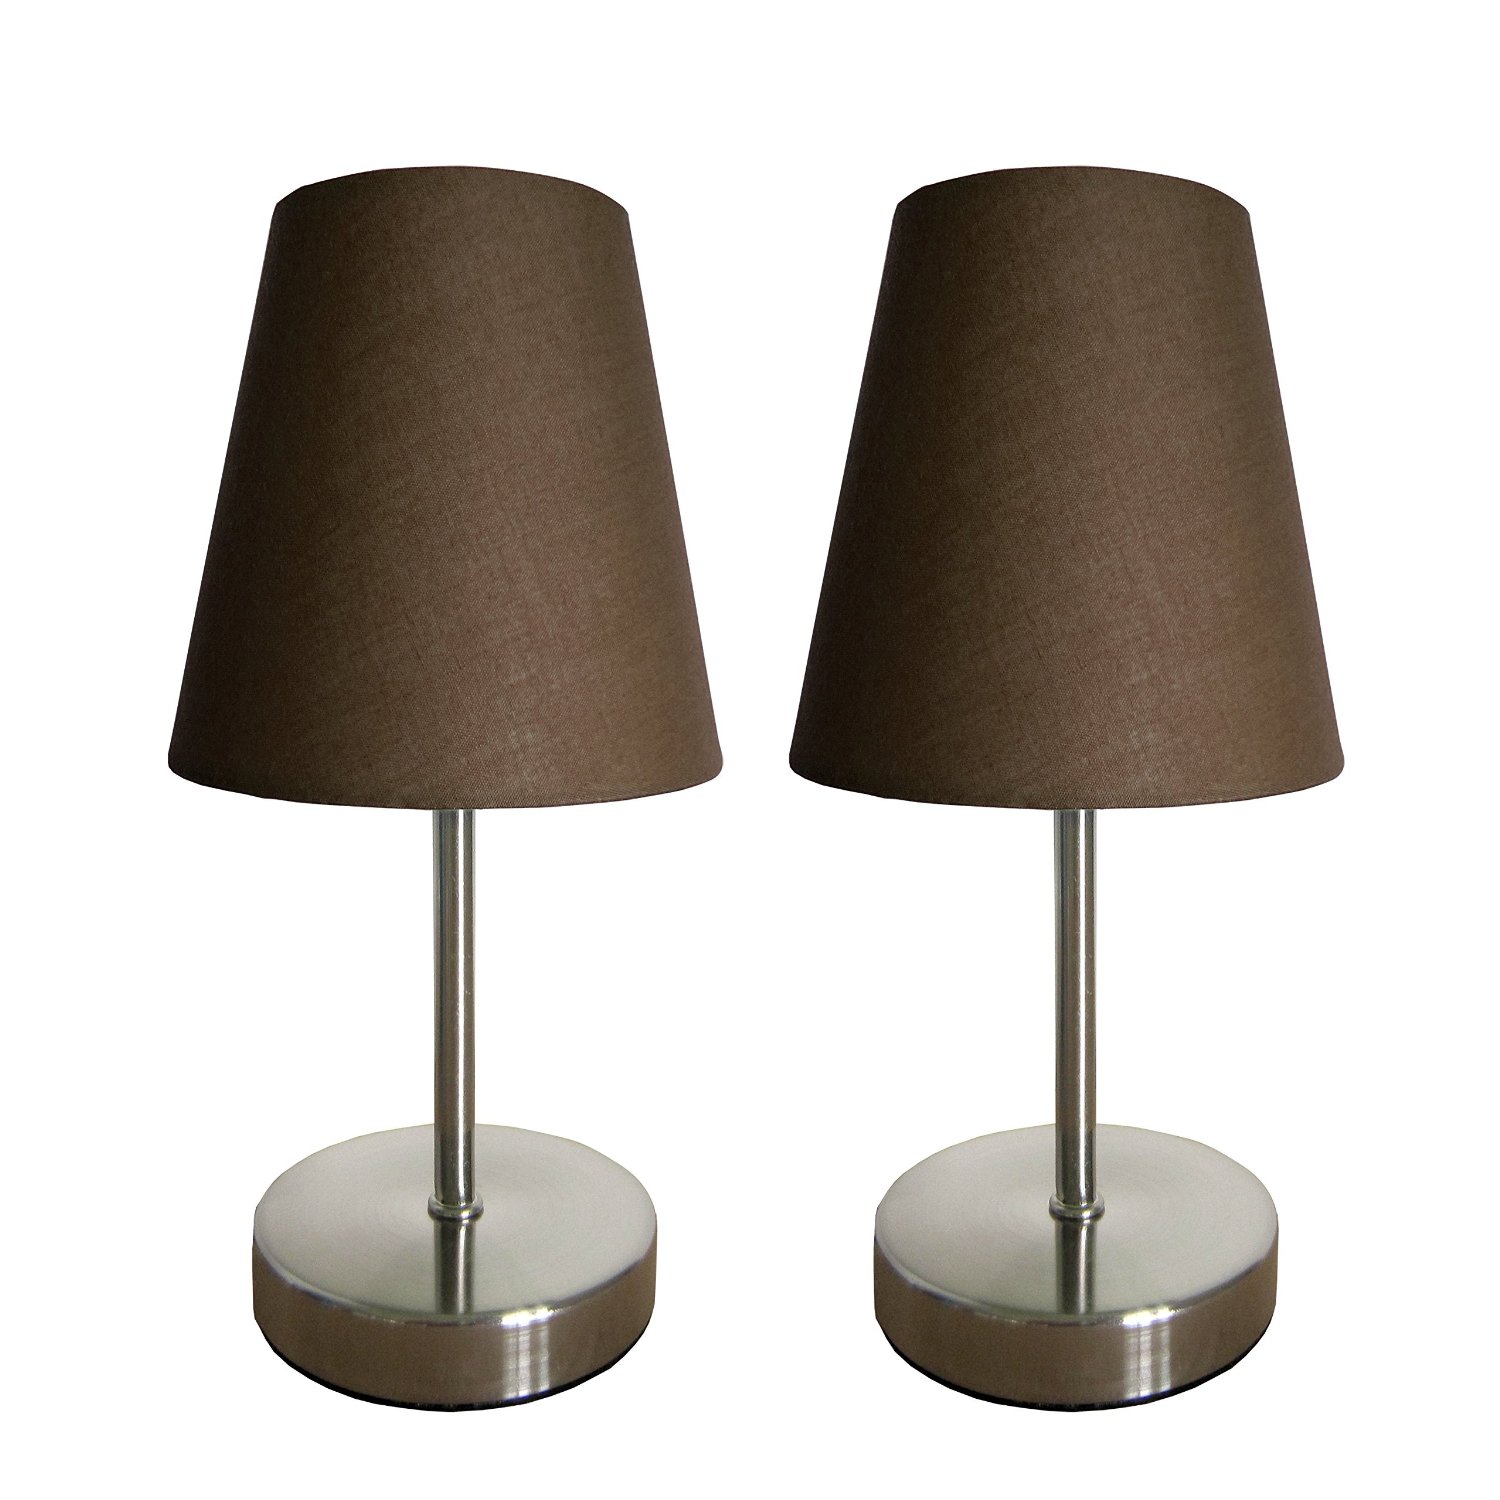 Simple Designs Sand Nickel Mini Basic Table Lamp with Fabric Shade 2 Pack Set